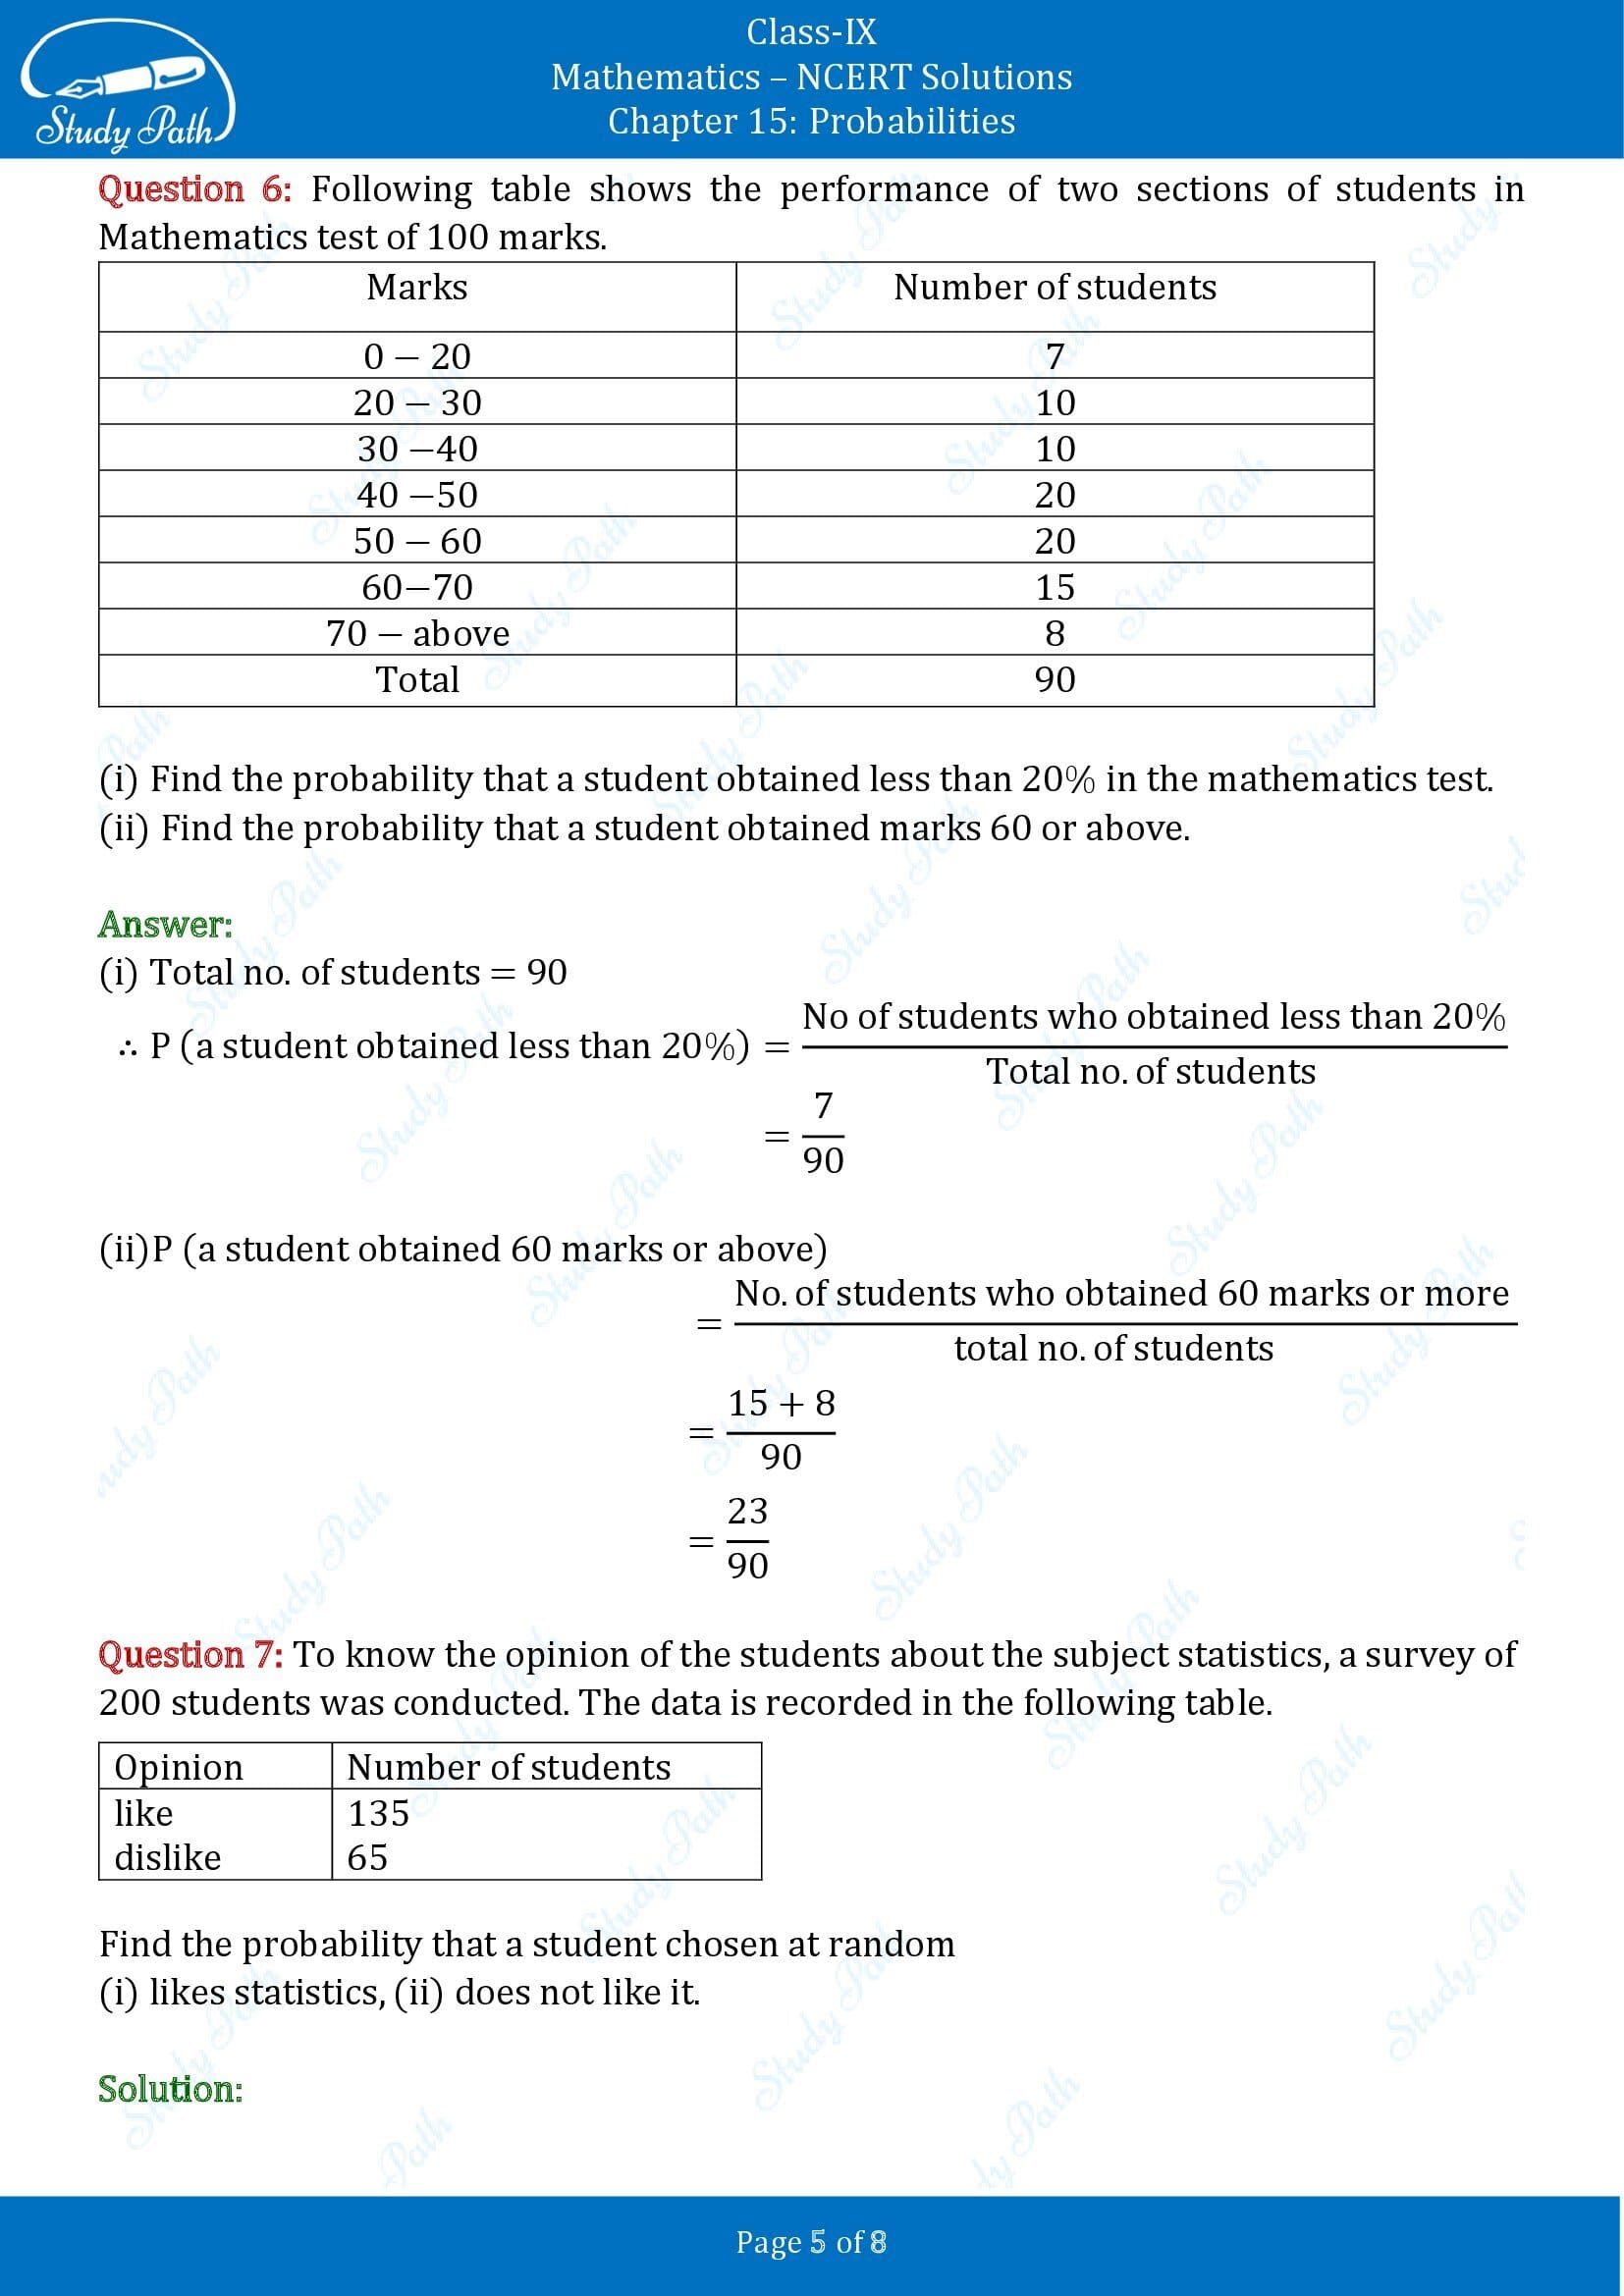 NCERT Solutions for Class 9 Maths Chapter 15 Probabilities 00005